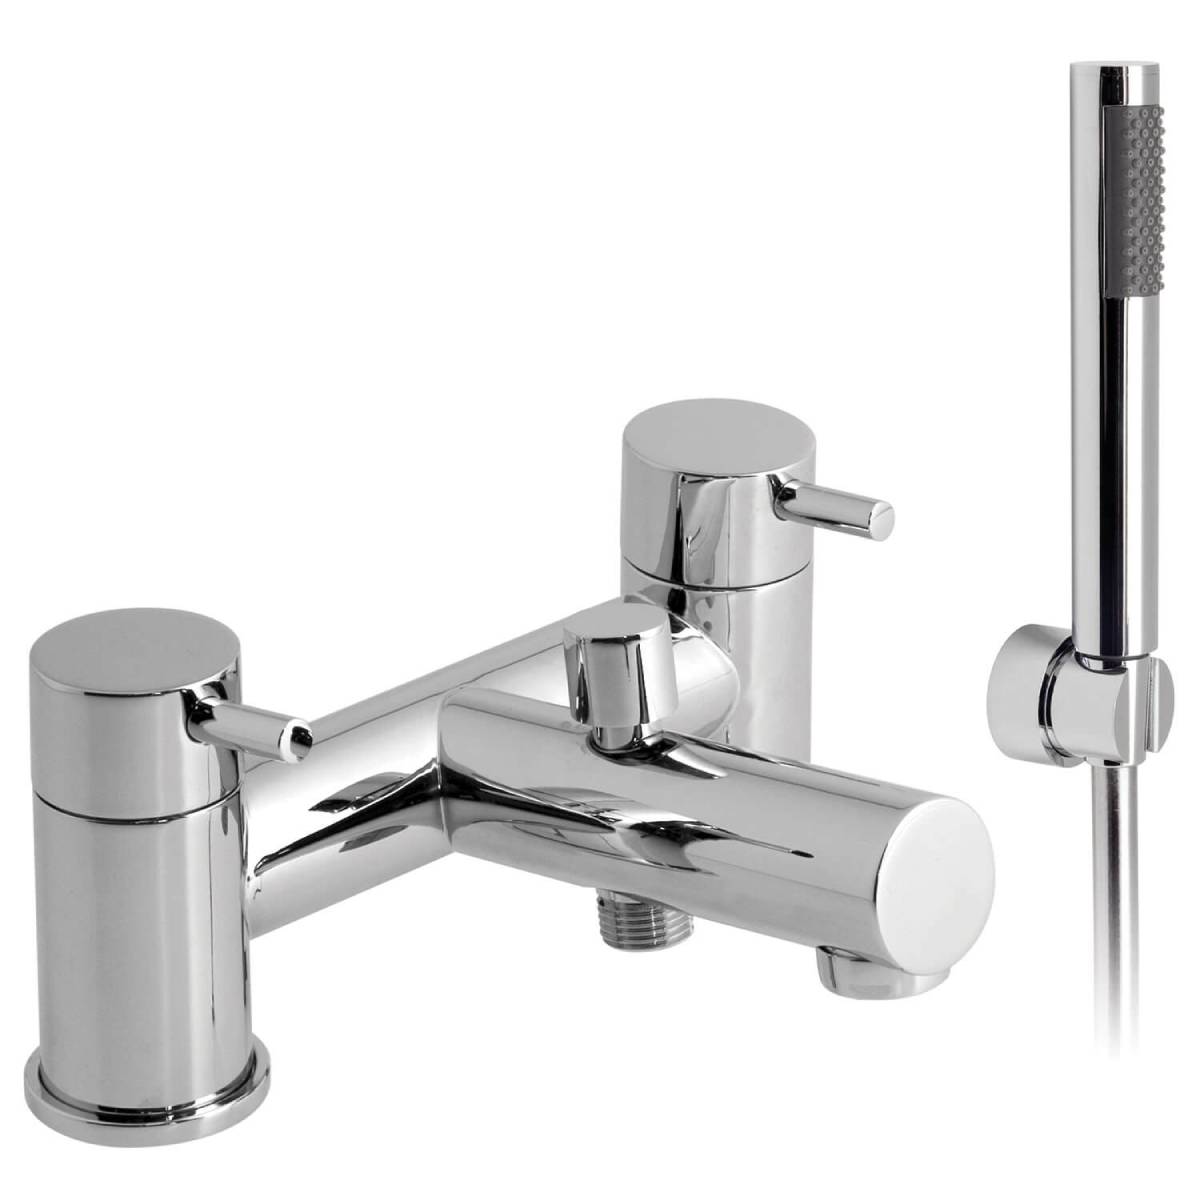 Vado Zoo Bath Shower Mixer with Shower Kit (2236)